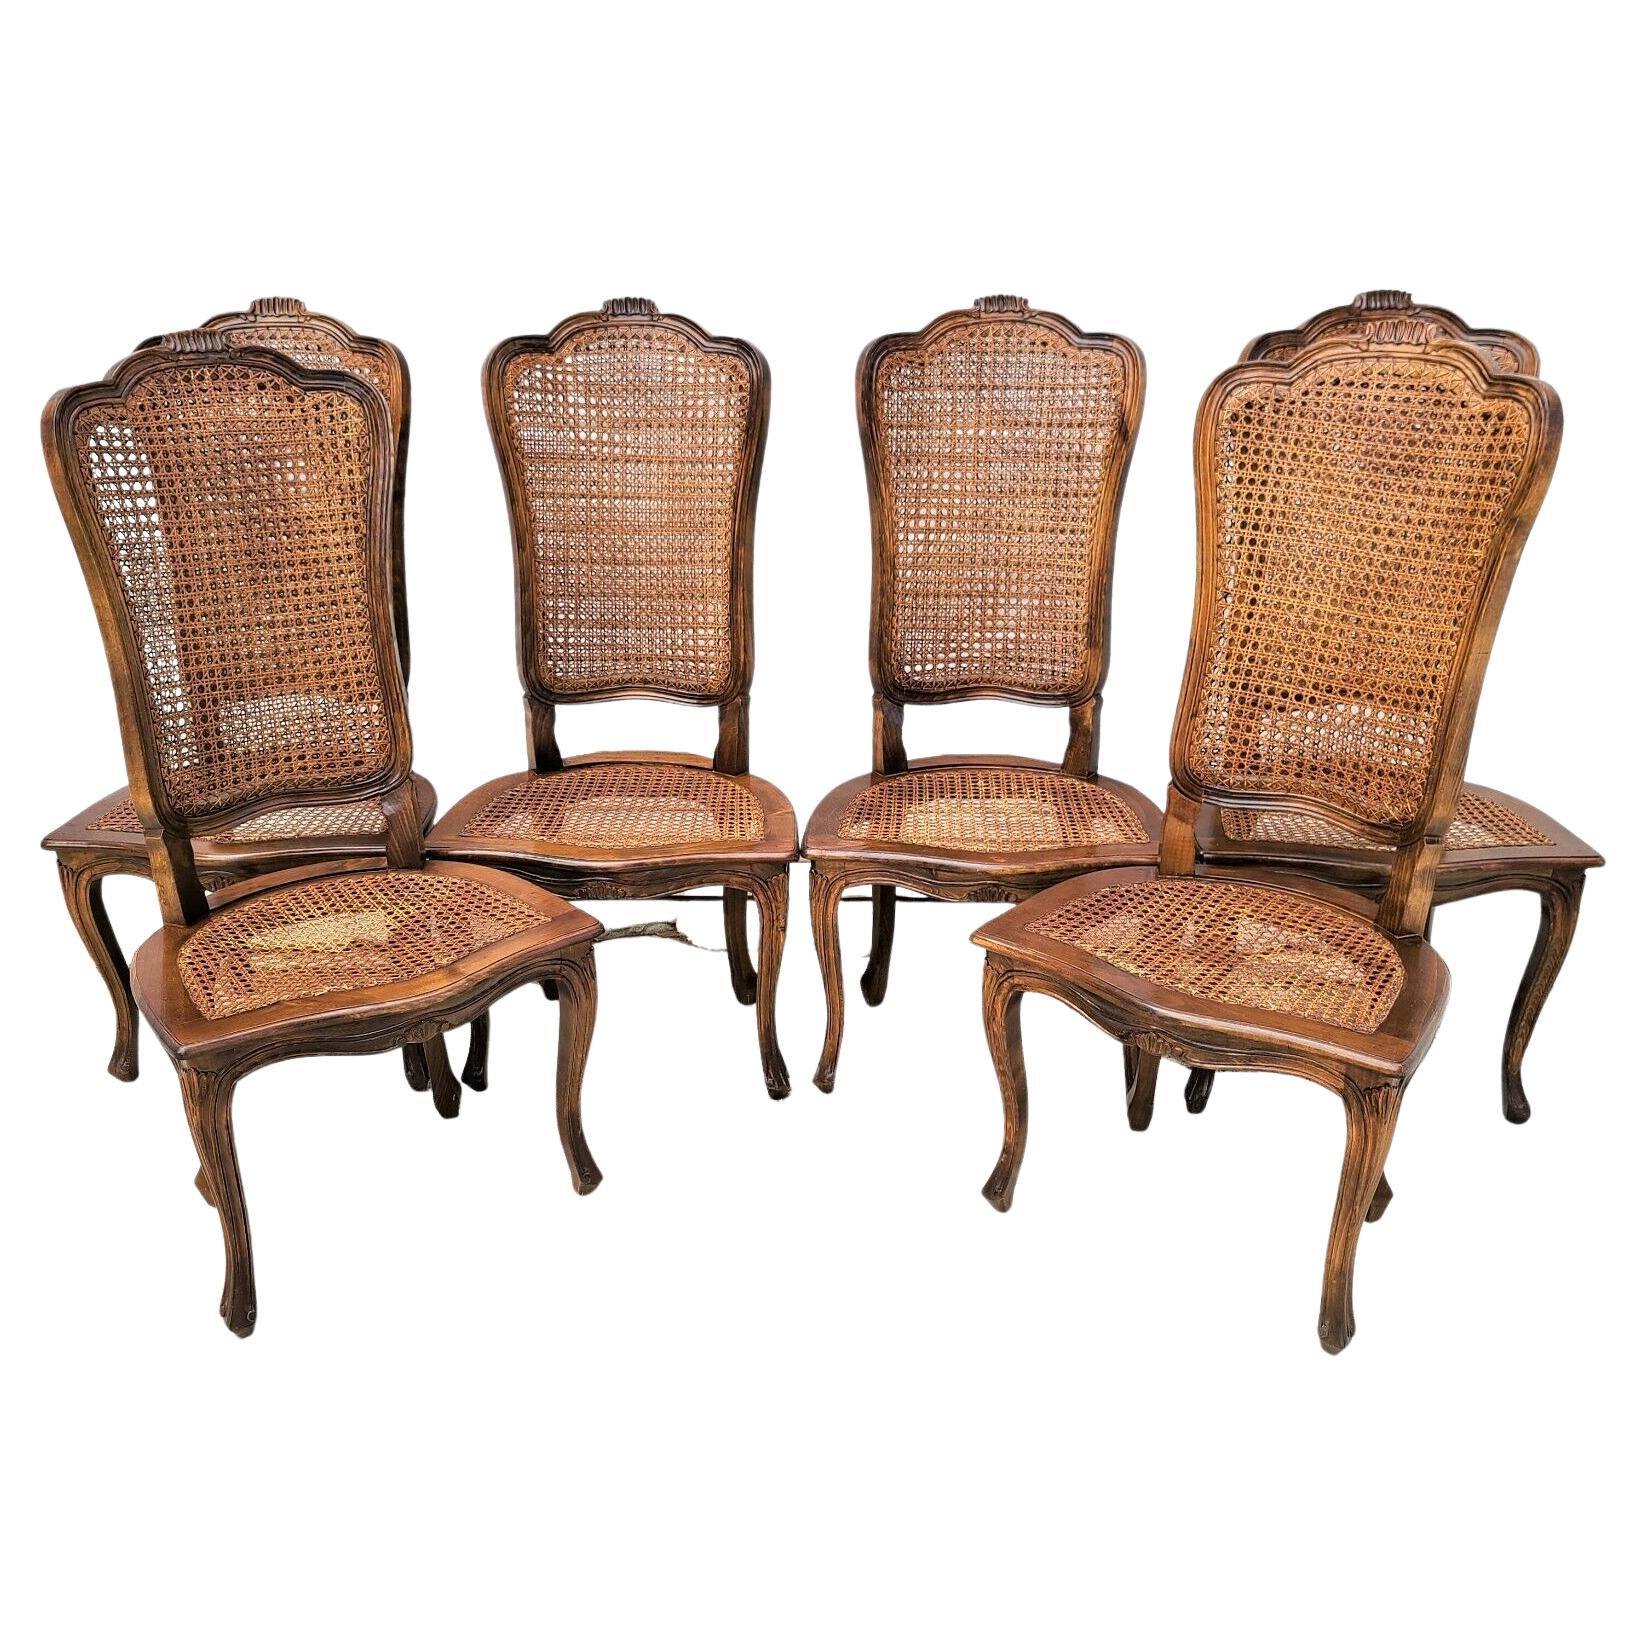 Antique French Provincial Cane Walnut Dining Chairs, Set of 6